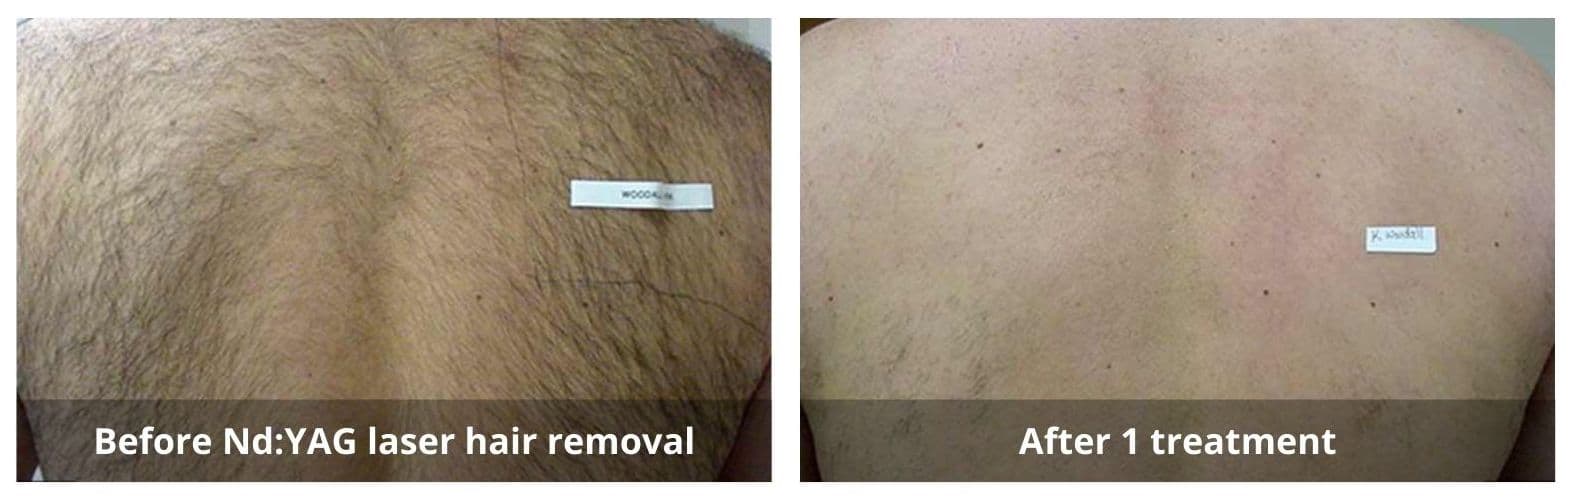 We offer laser hair removal waterloo kitchener services. Check the laser hair removal before and after pictures!